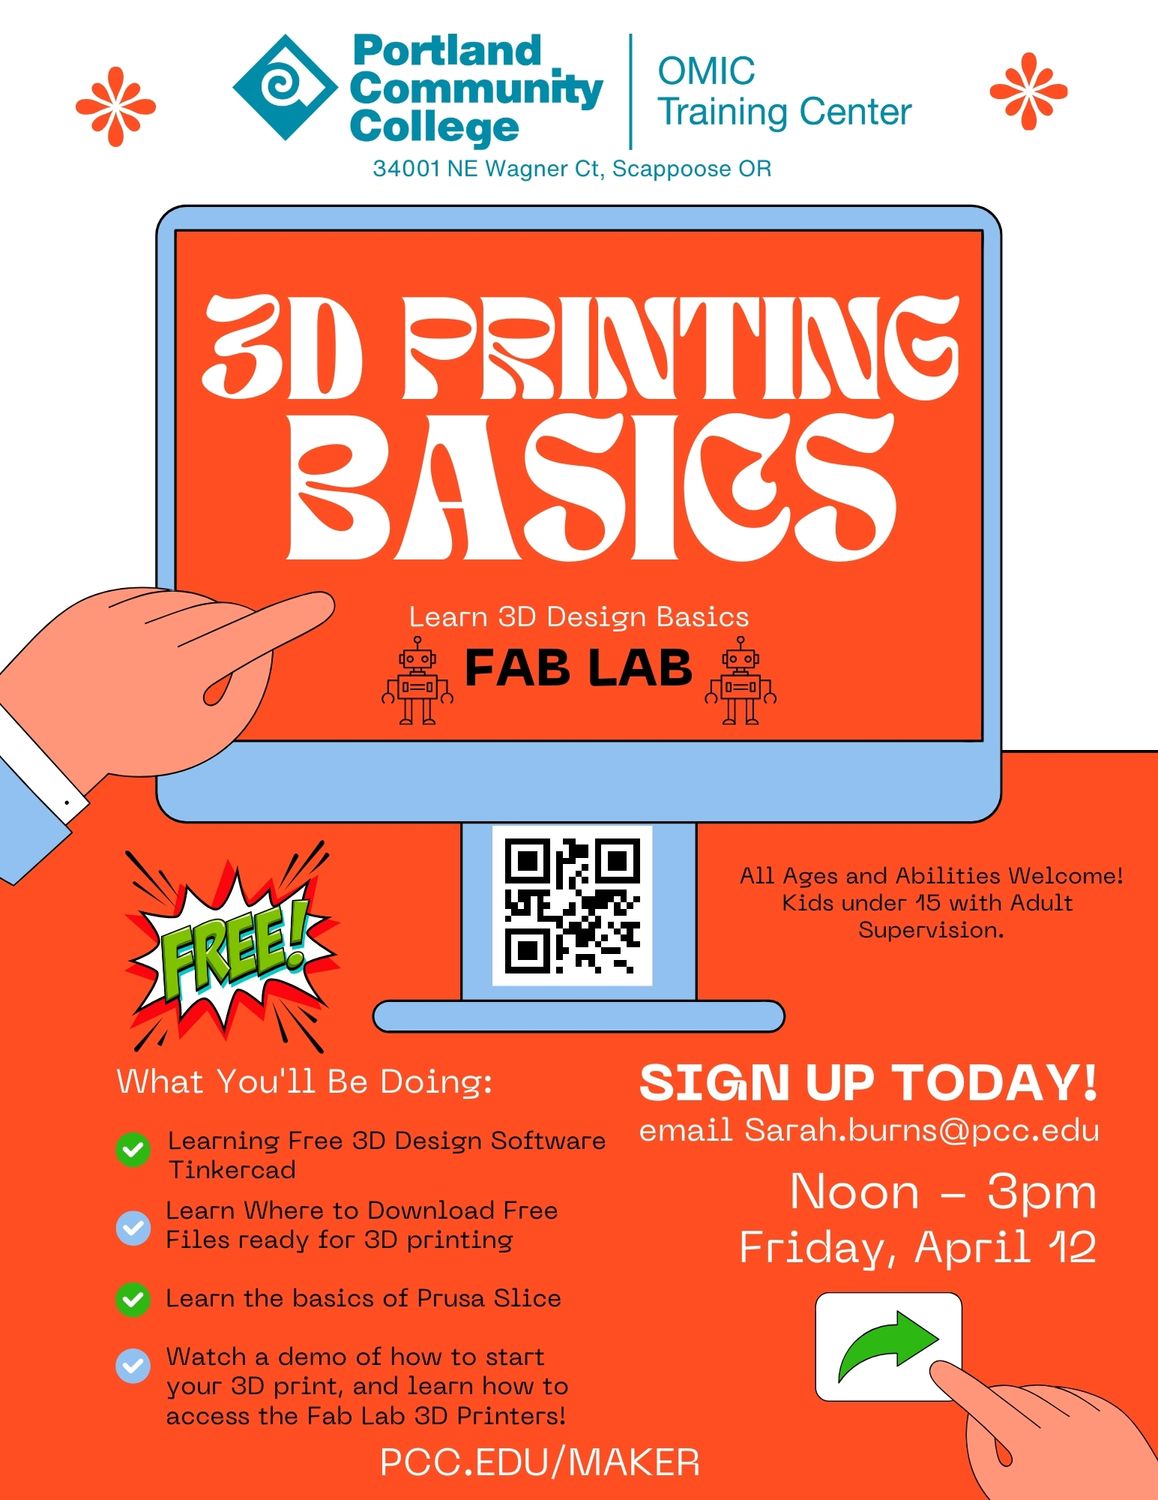 Learn the basics of 3D modeling with Tinkercad, and how to prep your design for 3D printing with Prusaslicer. This Friday, April 12th from Noon-3pm/ Sign up is Free. Email sarah.burns@pcc.edu for more information.